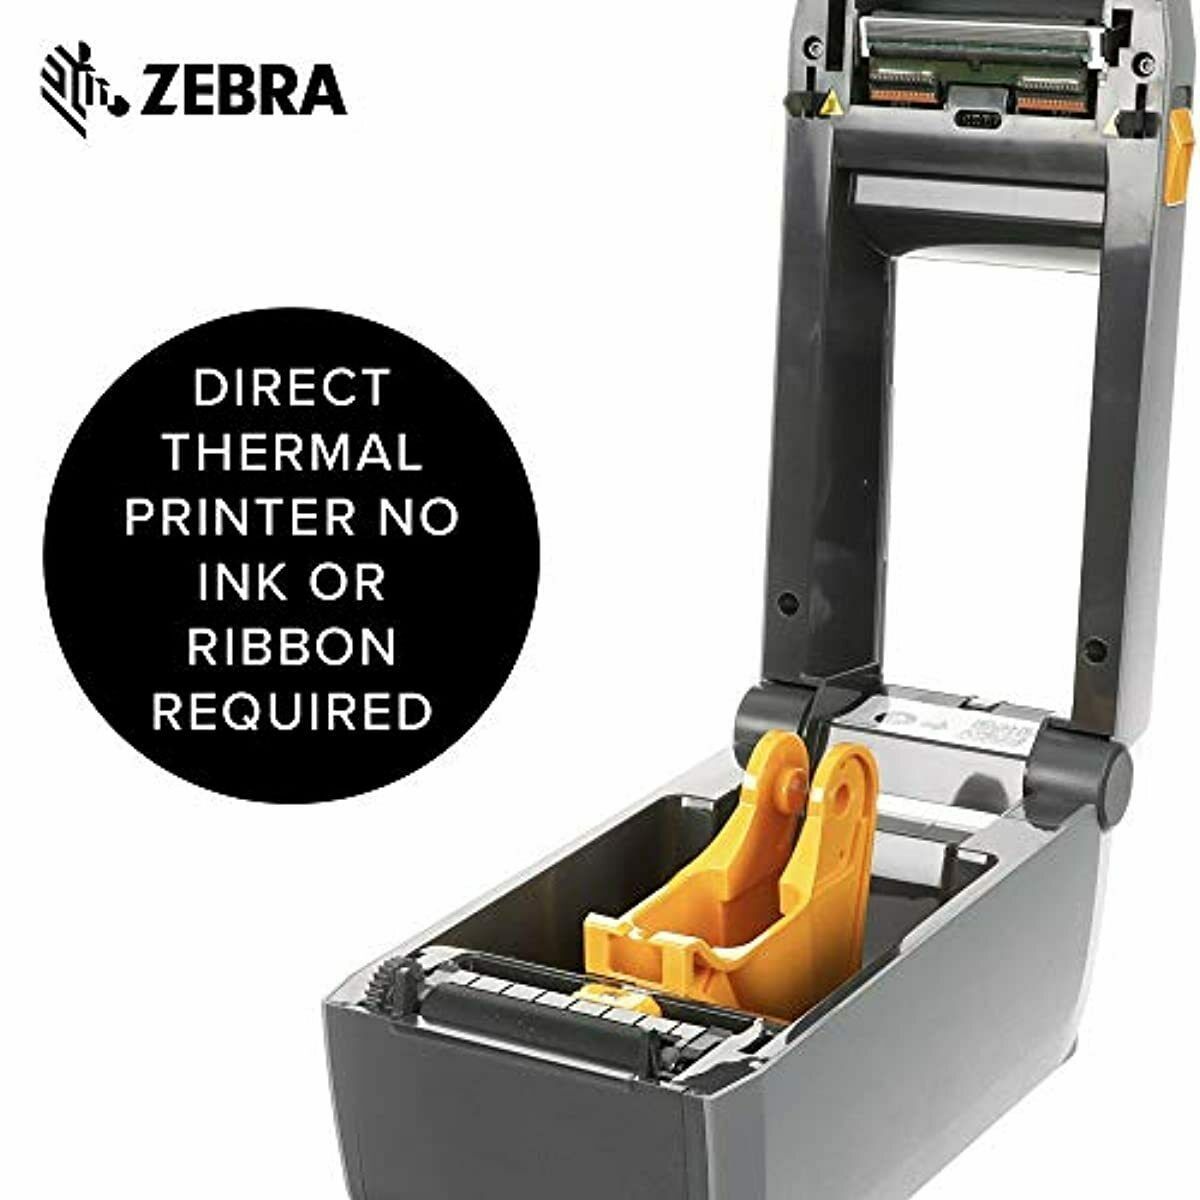 Zebra Zd410 Direct Thermal Desktop Printer For Labels Receipts Barcodes Tag Printers 6412